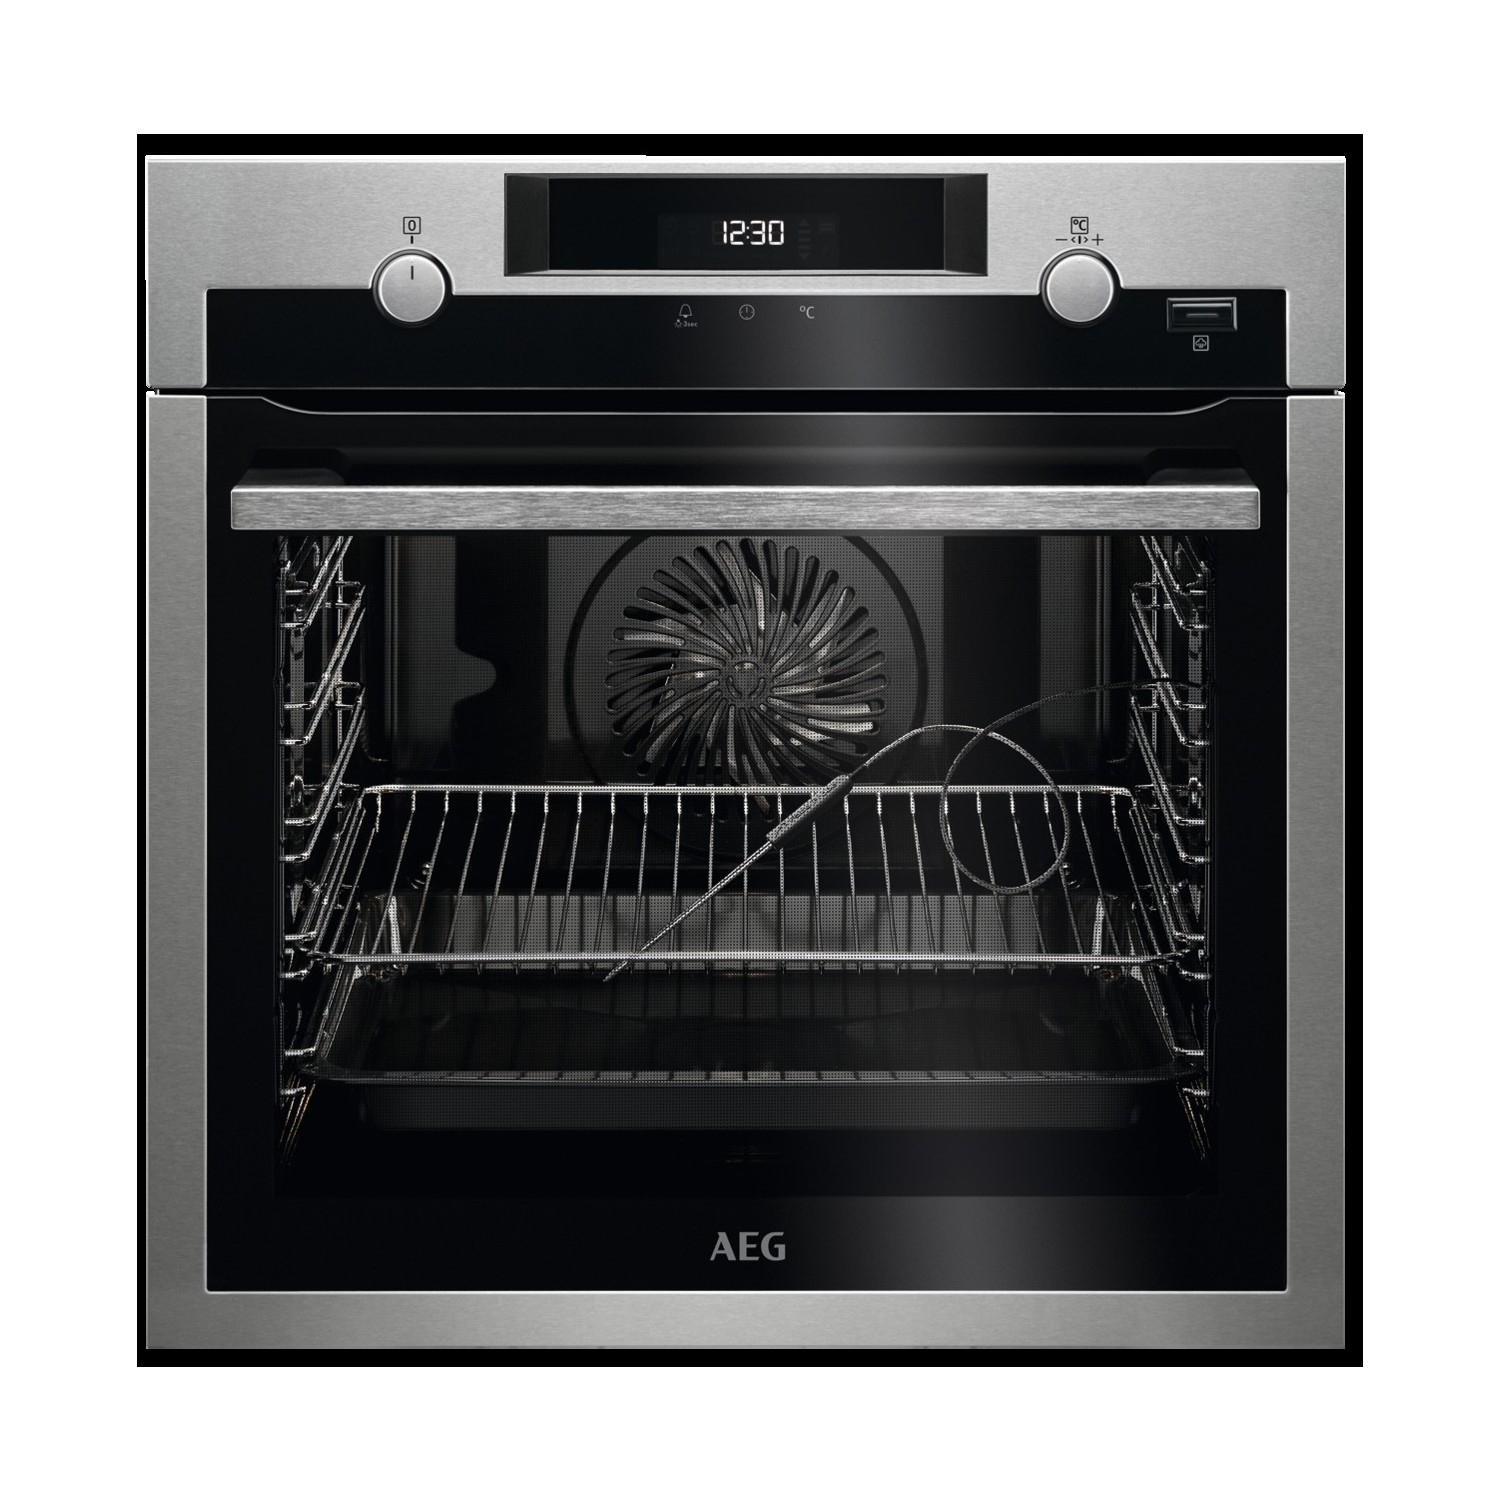 Refurbished AEG BPS556020M Single Buitl In Elecric Oven Stainless Steel